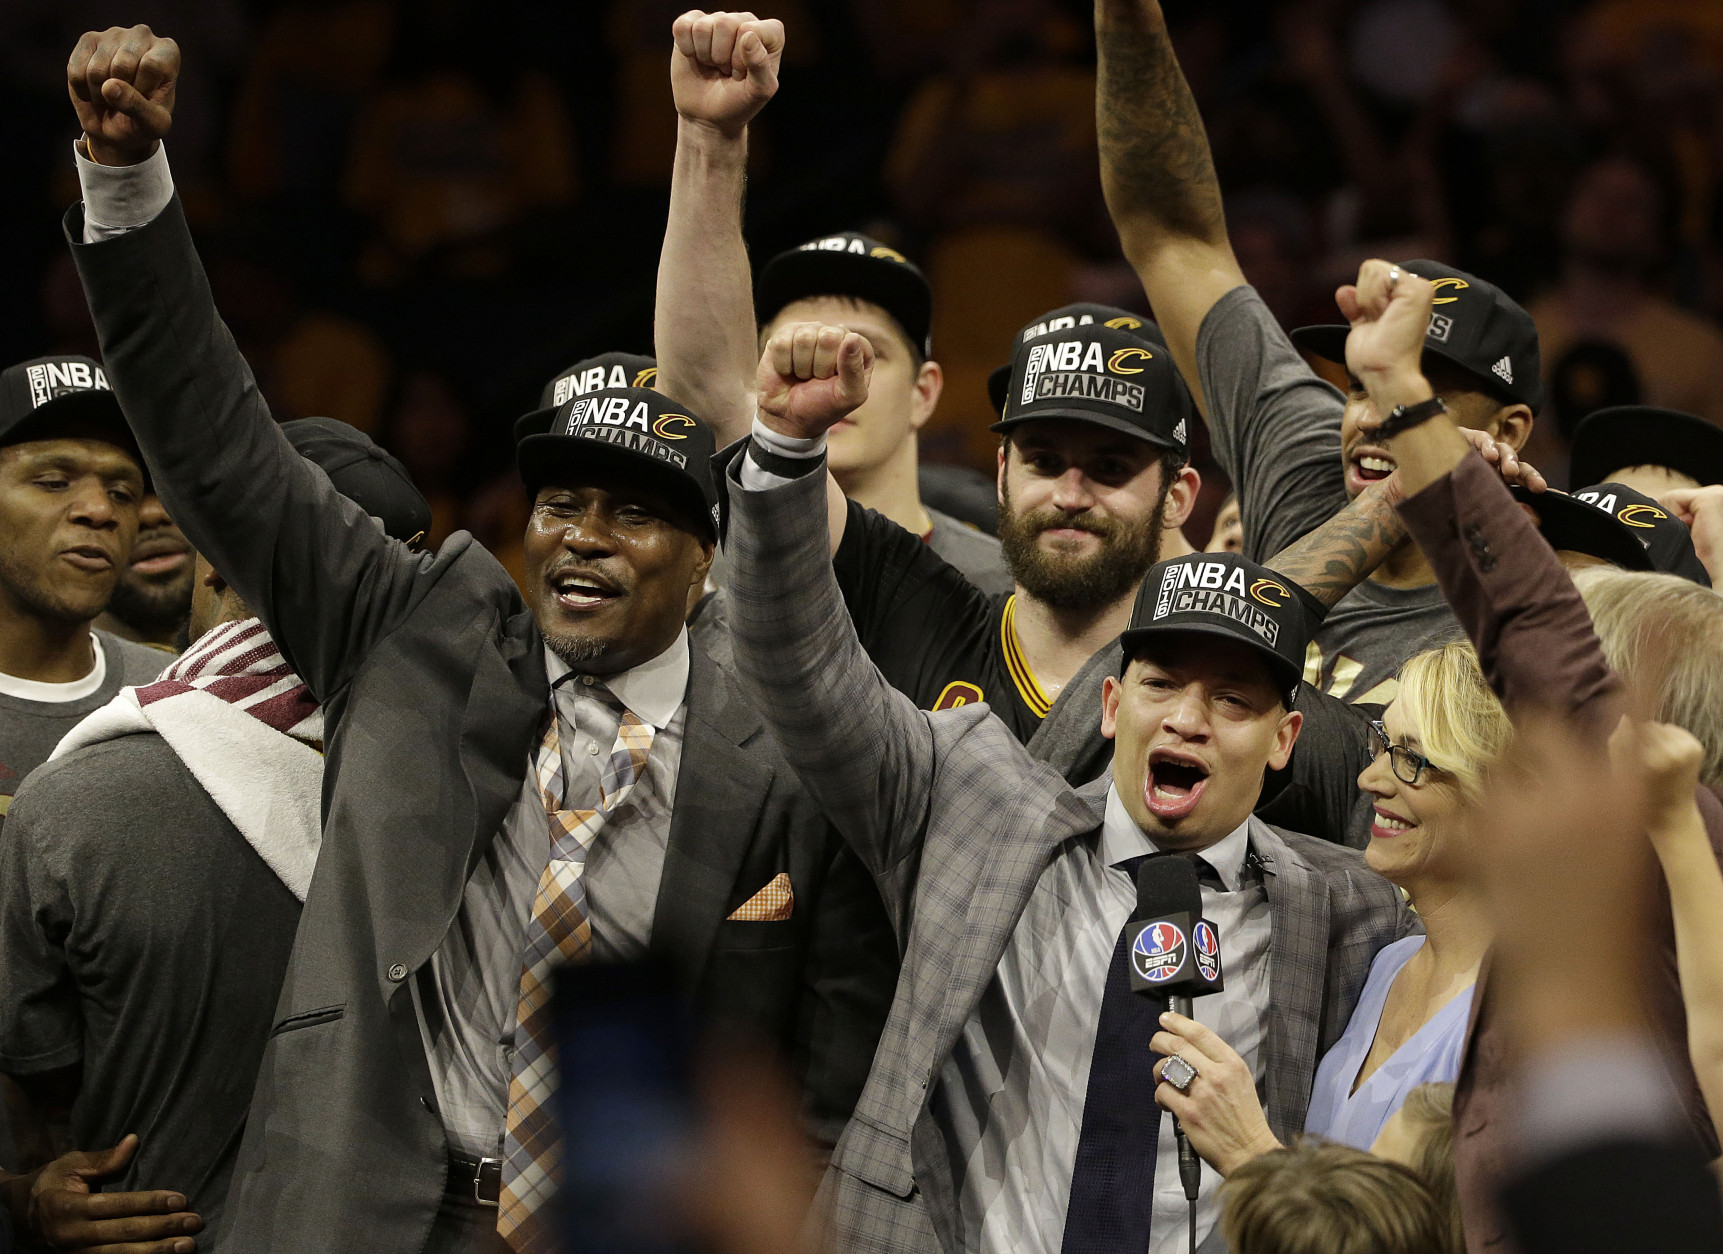 Cleveland Cavaliers head coach Tyronn Lue, second from right on bottom, celebrates after Game 7 of basketball's NBA Finals against the Golden State Warriors in Oakland, Calif., Sunday, June 19, 2016. The Cavaliers won 93-89. (AP Photo/Marcio Jose Sanchez)